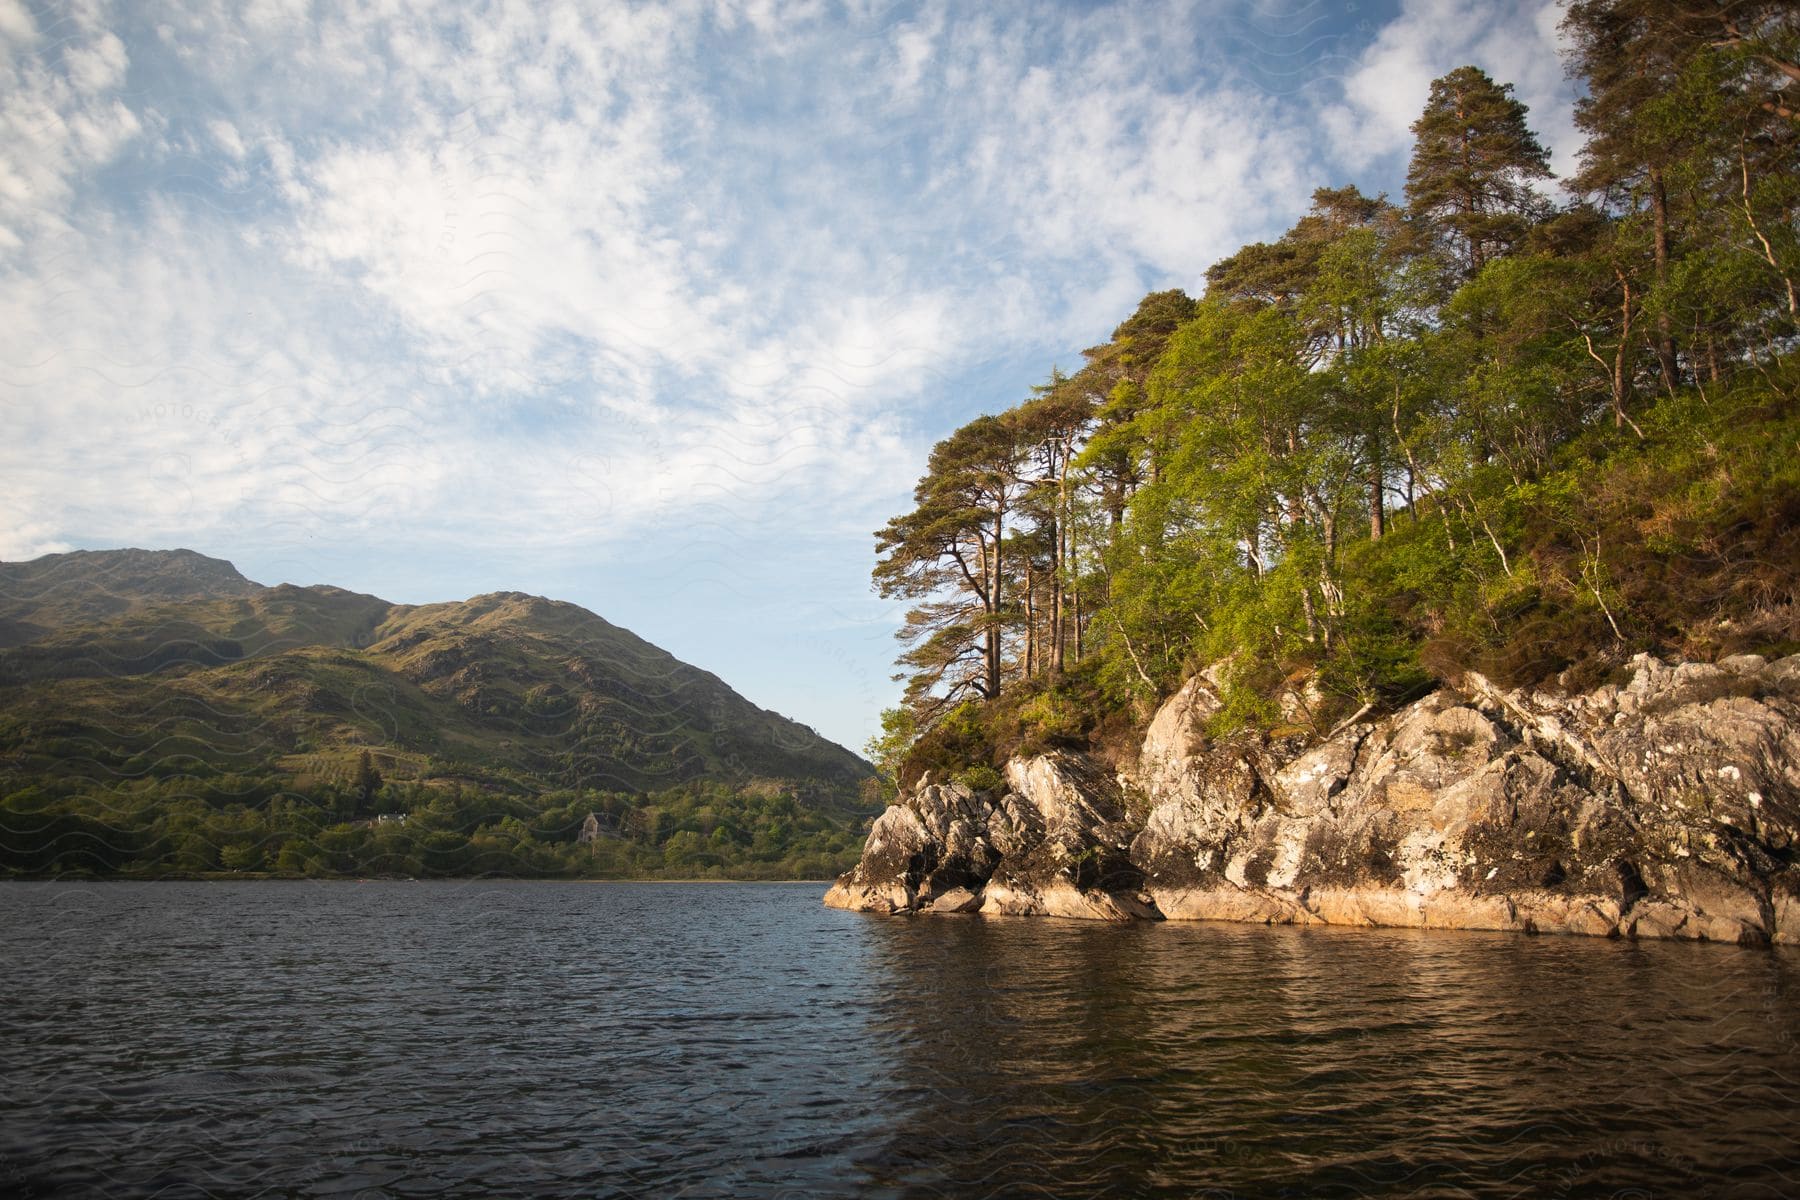 A majestic crag with trees overlooks a serene lake creating a breathtaking landscape